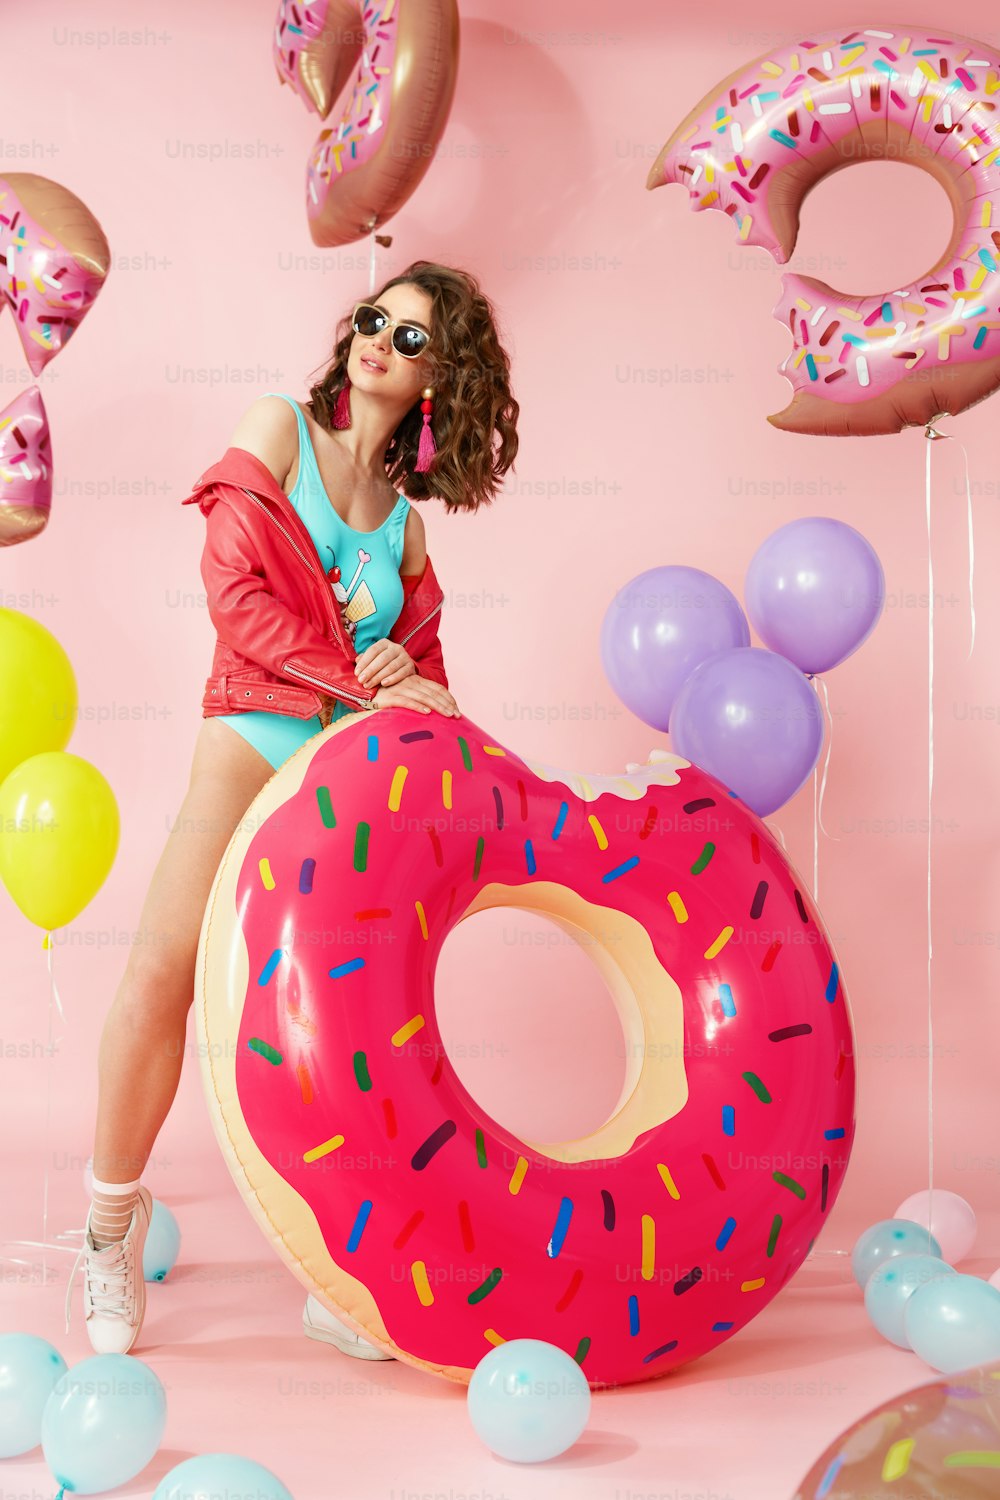 Summer Fashion. Woman In Swimsuit With Balloons. Beautiful Happy Young Female Model With Fit Body In Fashionable Colorful Swimwear With Inflatable Donut Floats On Pink Bakcground. High Resolution.